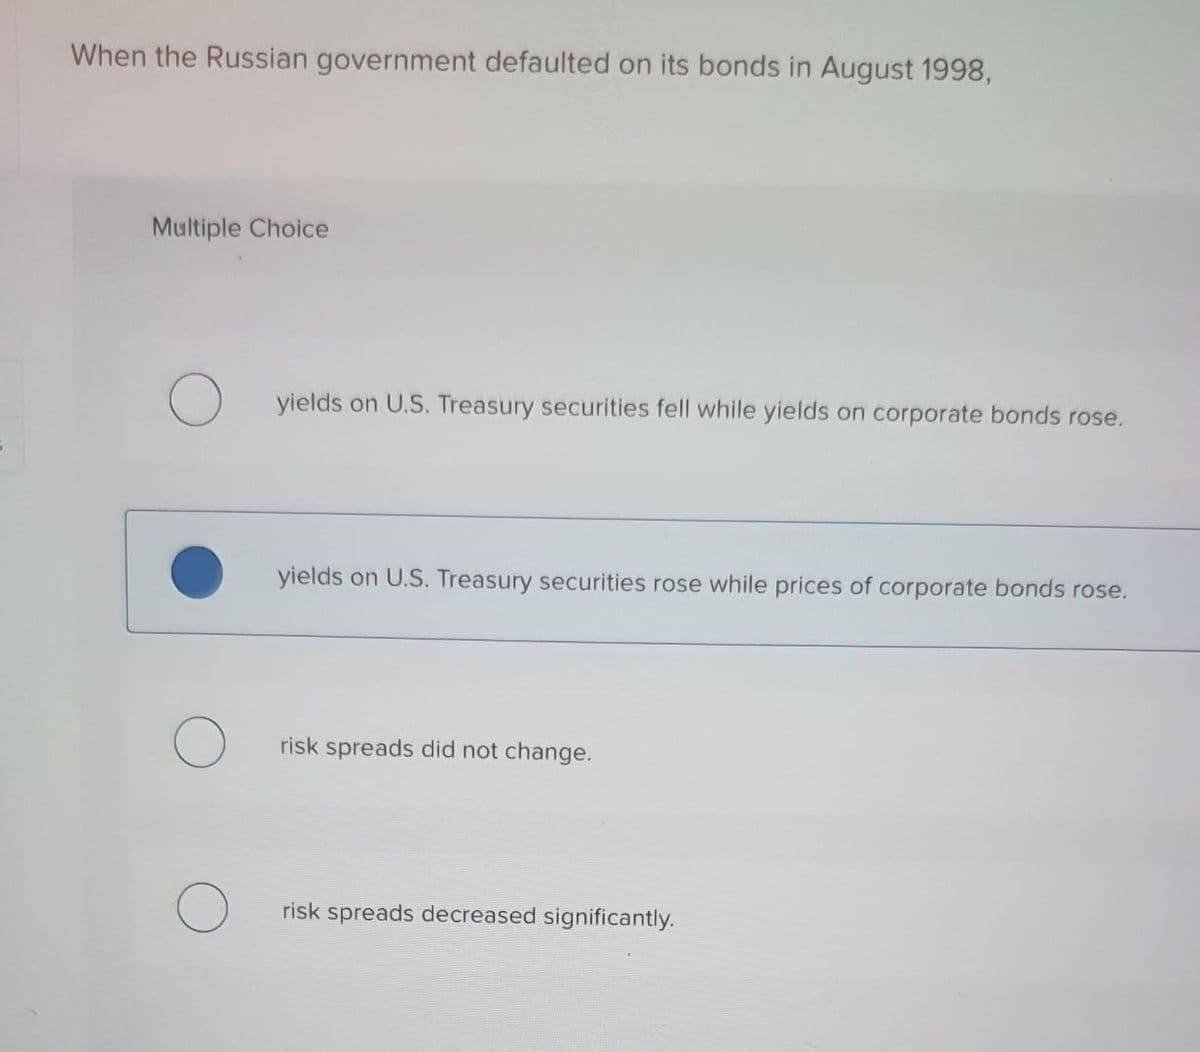 When the Russian government defaulted on its bonds in August 1998,
Multiple Choice
yields on U.S. Treasury securities fell while yields on corporate bonds rose.
yields on U.S. Treasury securities rose while prices of corporate bonds rose.
risk spreads did not change.
risk spreads decreased significantly.